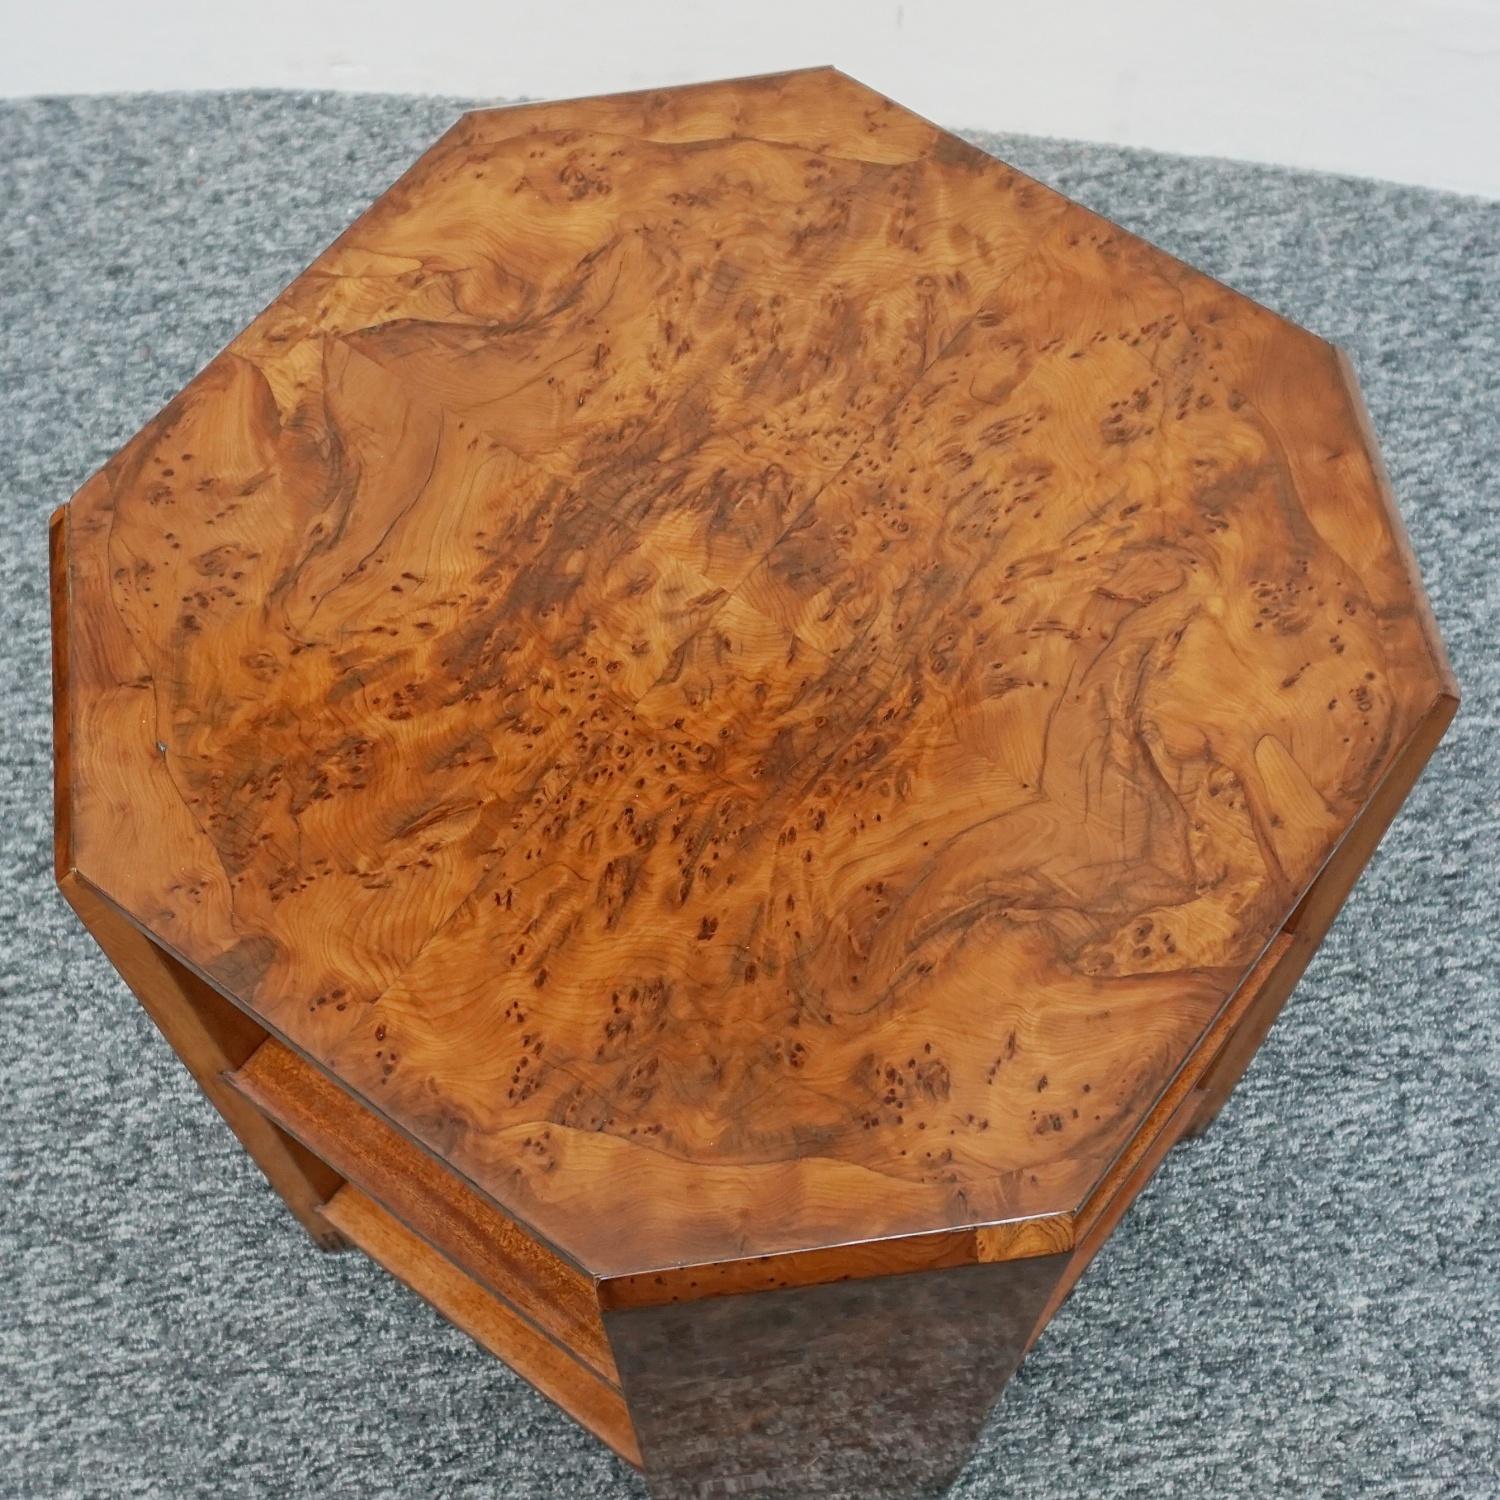 Macassar Art Deco Yew Wood Side Table by Waring & Gillow Ltd, circa 1935